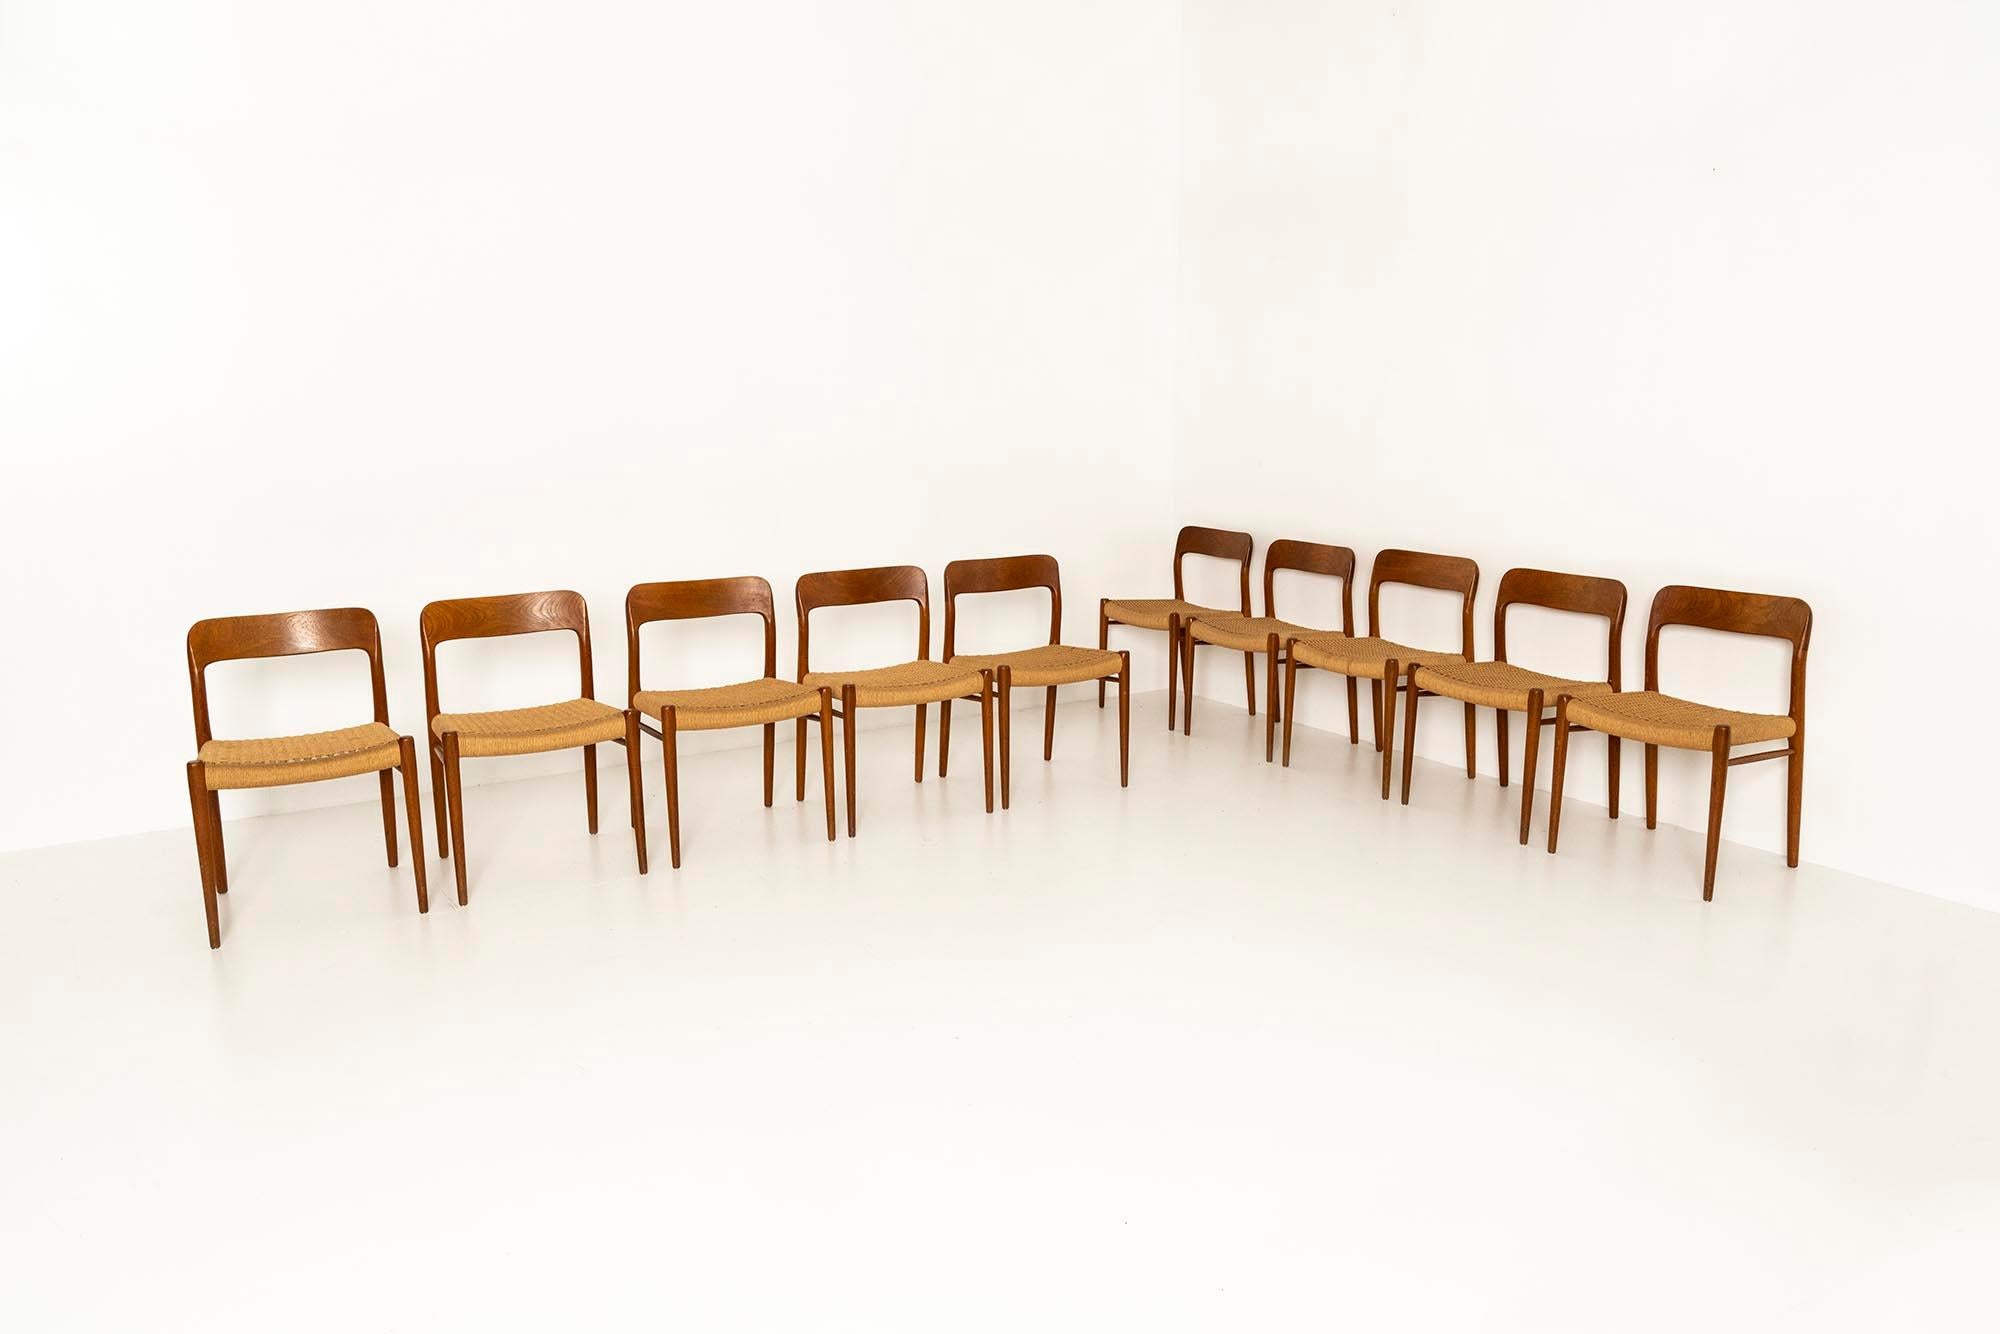 Papercord 10 Niels Otto Møller 'Model 75' Chairs in Teak and Danish Paper Cord, 1960s For Sale